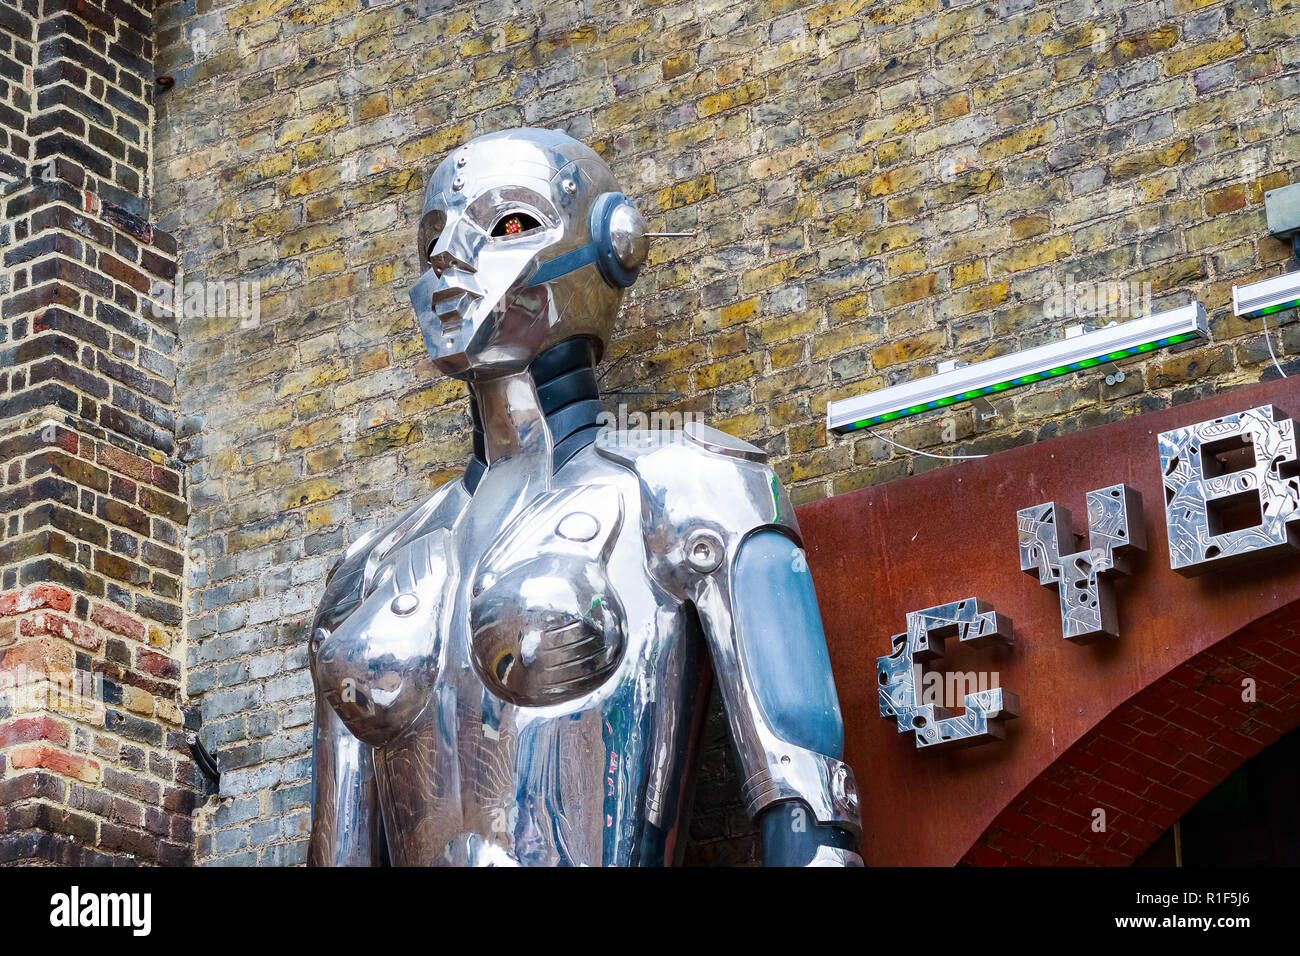 London, UK - September 1, 2018 - Giant robot statue flanking outside Cyberdog known for futuristic and fluorescent clothing and fashion, Camden market Stock Photo